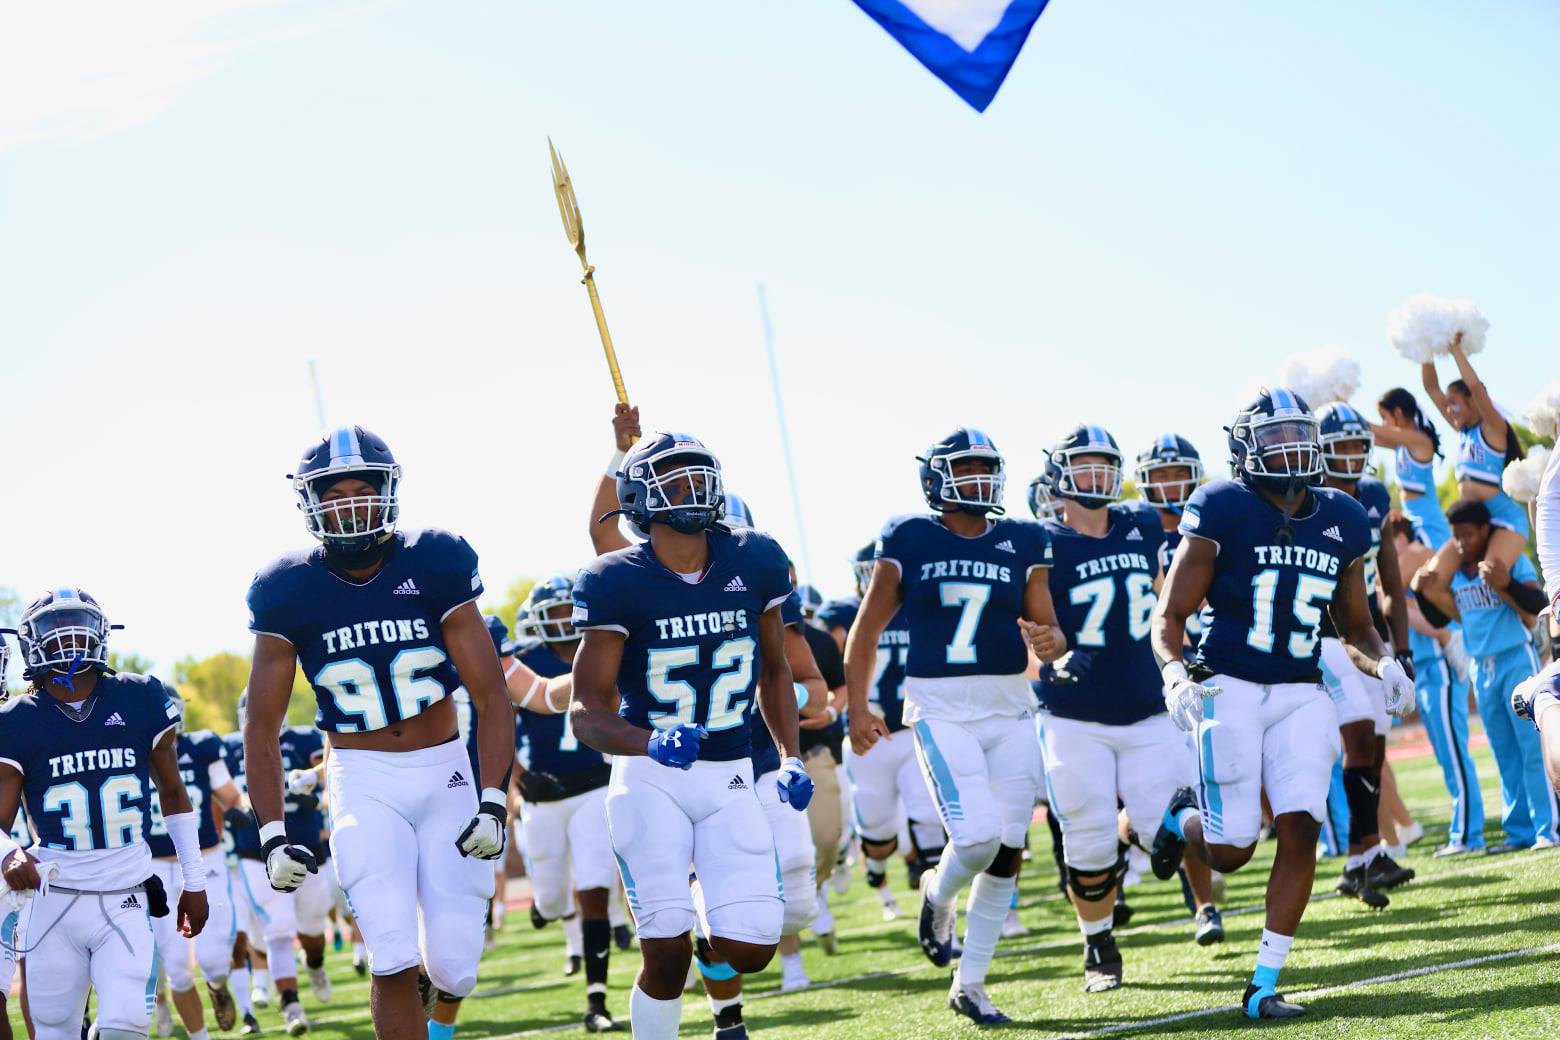 Homecoming delight for No. 12 Tritons